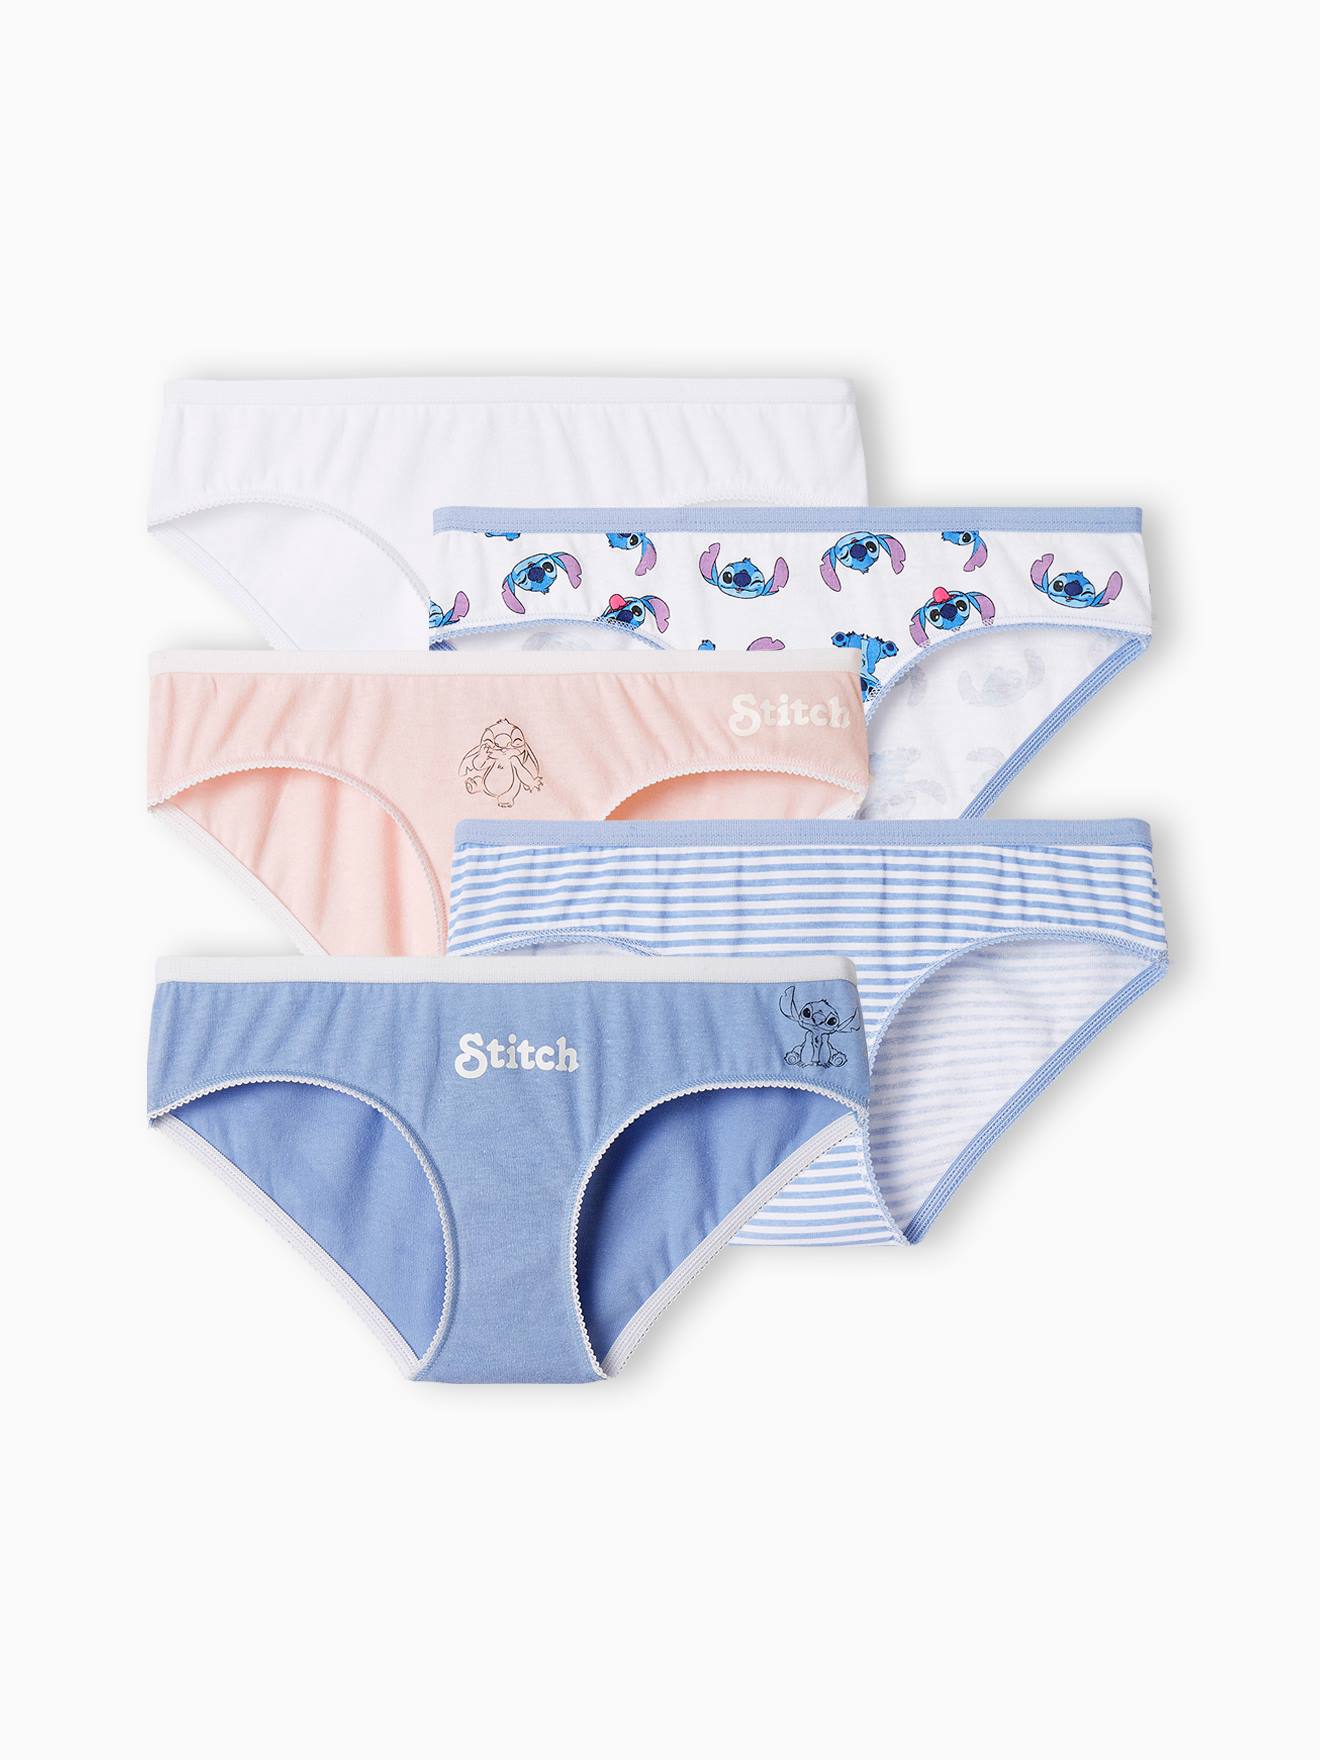 Pack of 5 Stitch Briefs for Girls, by Disney(r) sky blue